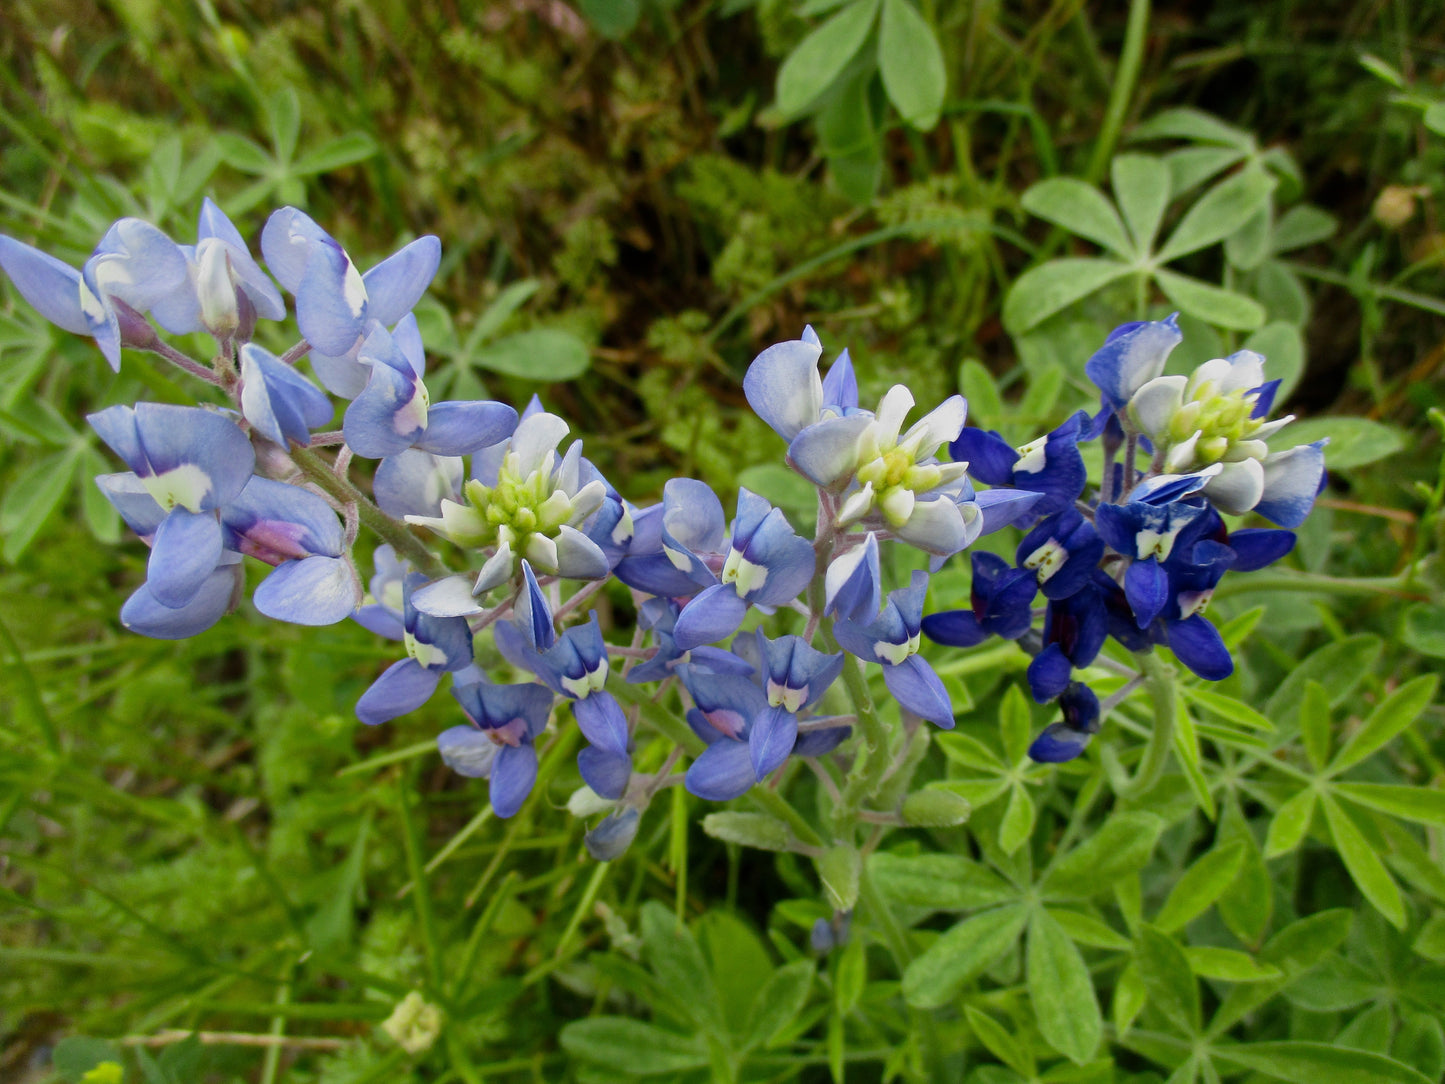 Out of green leaves arise flowers with almost triangular petals. The flowers on the left are periwinkle blue tipped with white; the rightmost is a very deep blue tipped with white. 